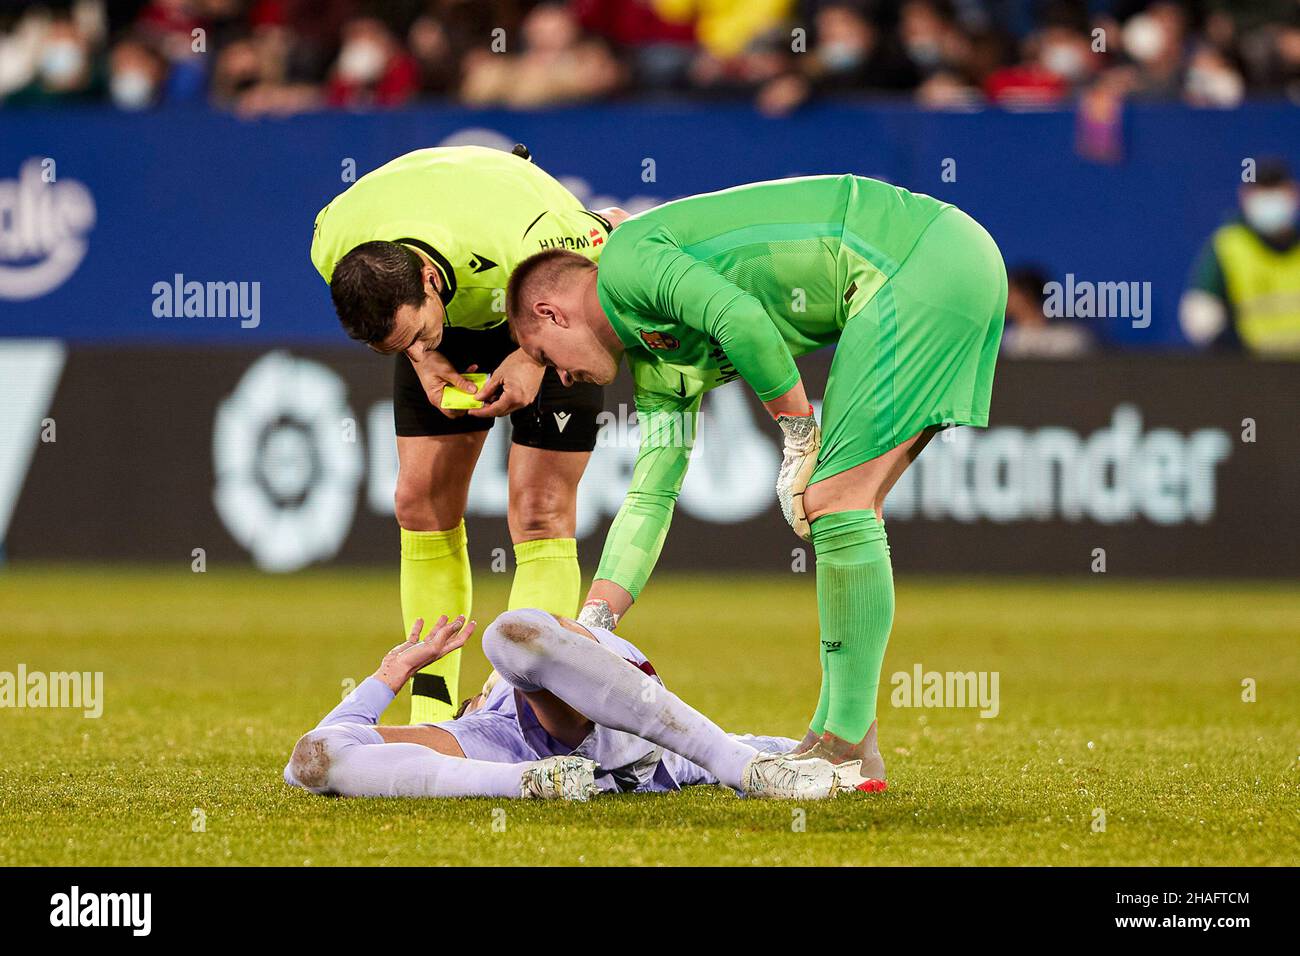 Pamplona, Spain. 12th Dec, 2021. Gerard Piqué (L) of FC Barcelona, Marc-Andre Ter Stegen (R) goalkeeper of FC Barcelona are seen during the Spanish football of La Liga Santander, the match between CA Osasuna and FC Barcelona at the Sadar stadium, in Pamplona.(Final score; CA Osasuna 2:2 FC Barcelona) Credit: SOPA Images Limited/Alamy Live News Stock Photo